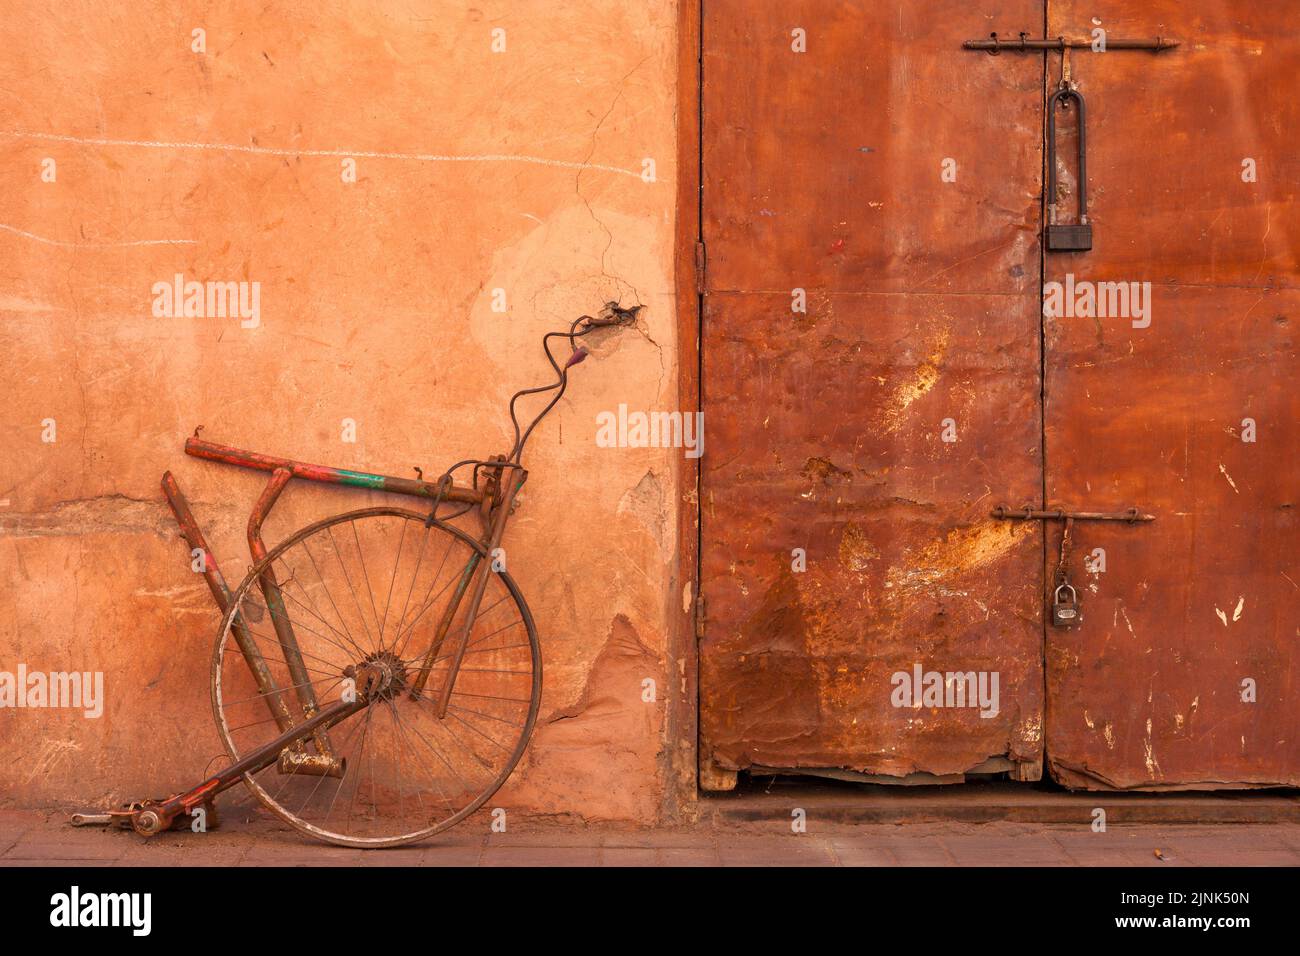 Leftovers of bicycle fixed to wall next to rusty door in Marrakesh, Morocco Stock Photo